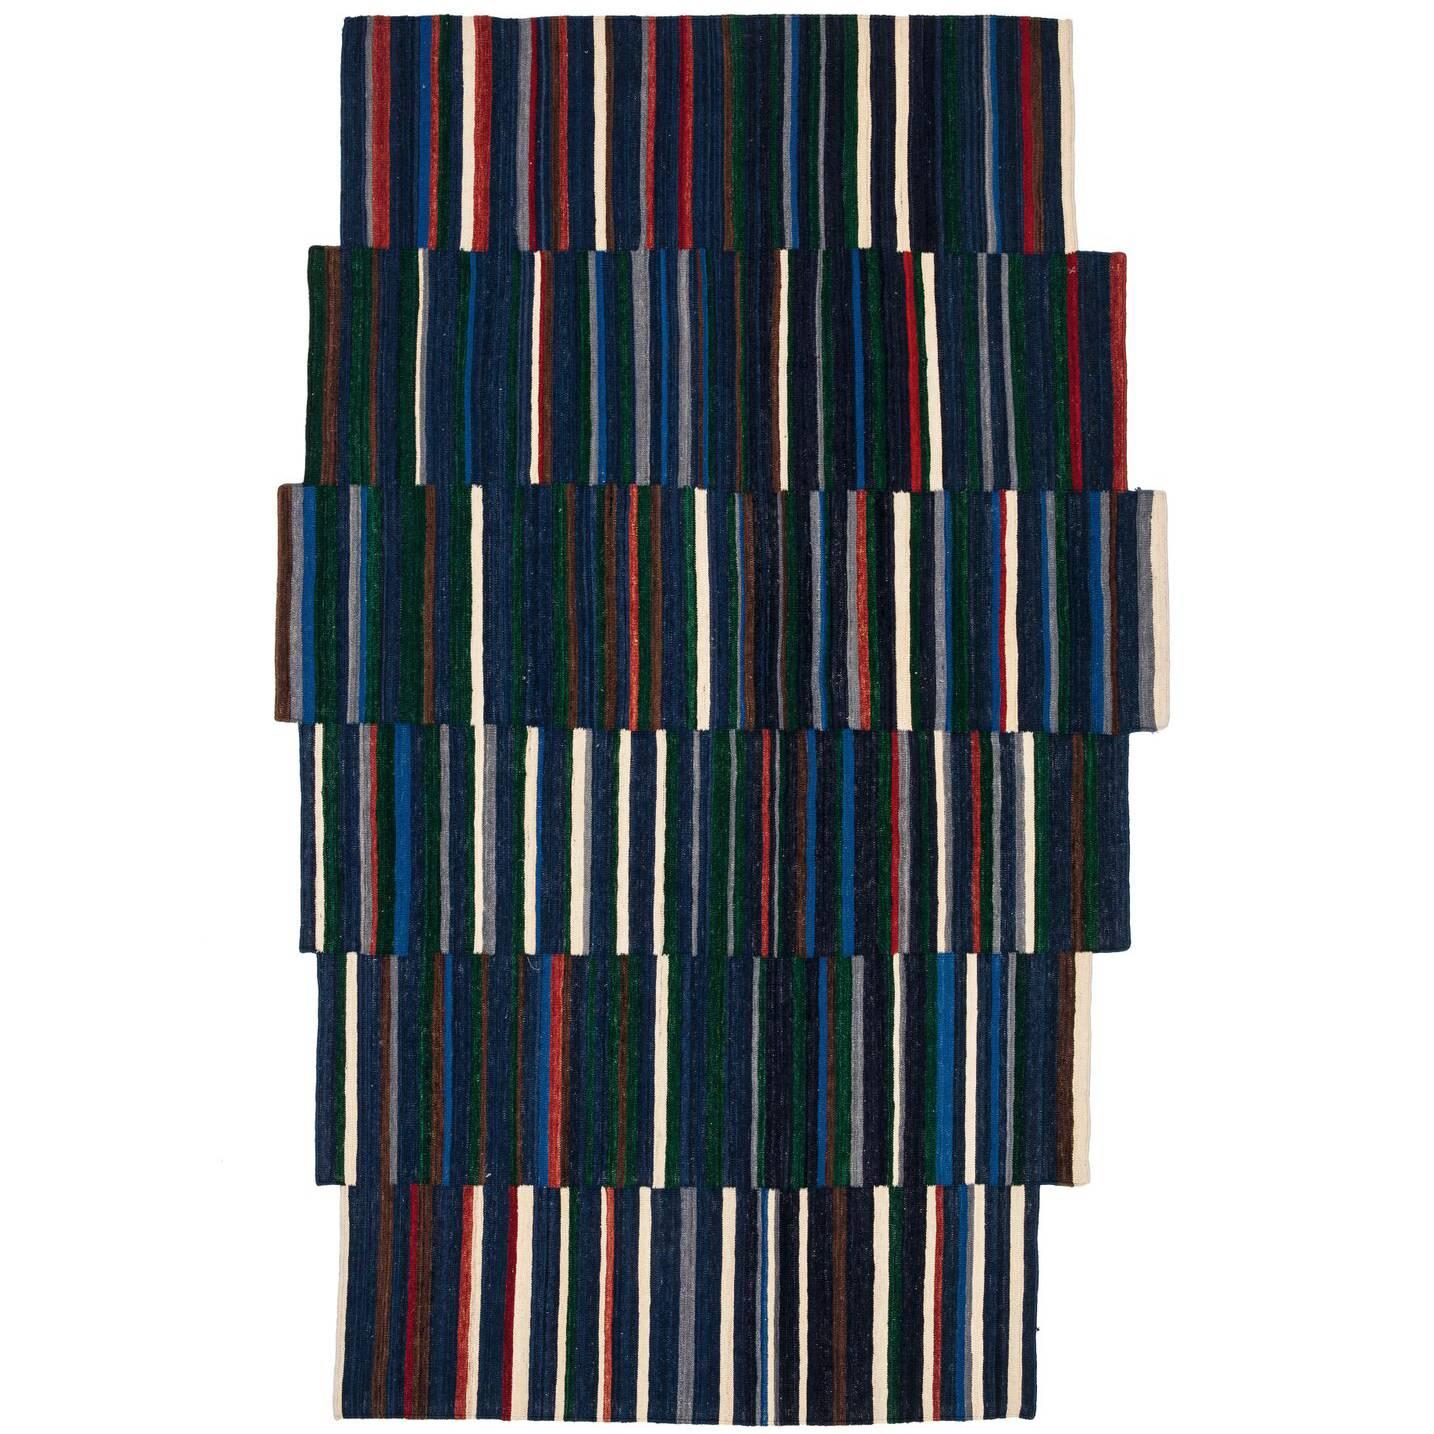 Lattice 1 Hand-Loomed Afghan Wool Rug by Ronan & Erwan Bouroullec, Extra Large For Sale